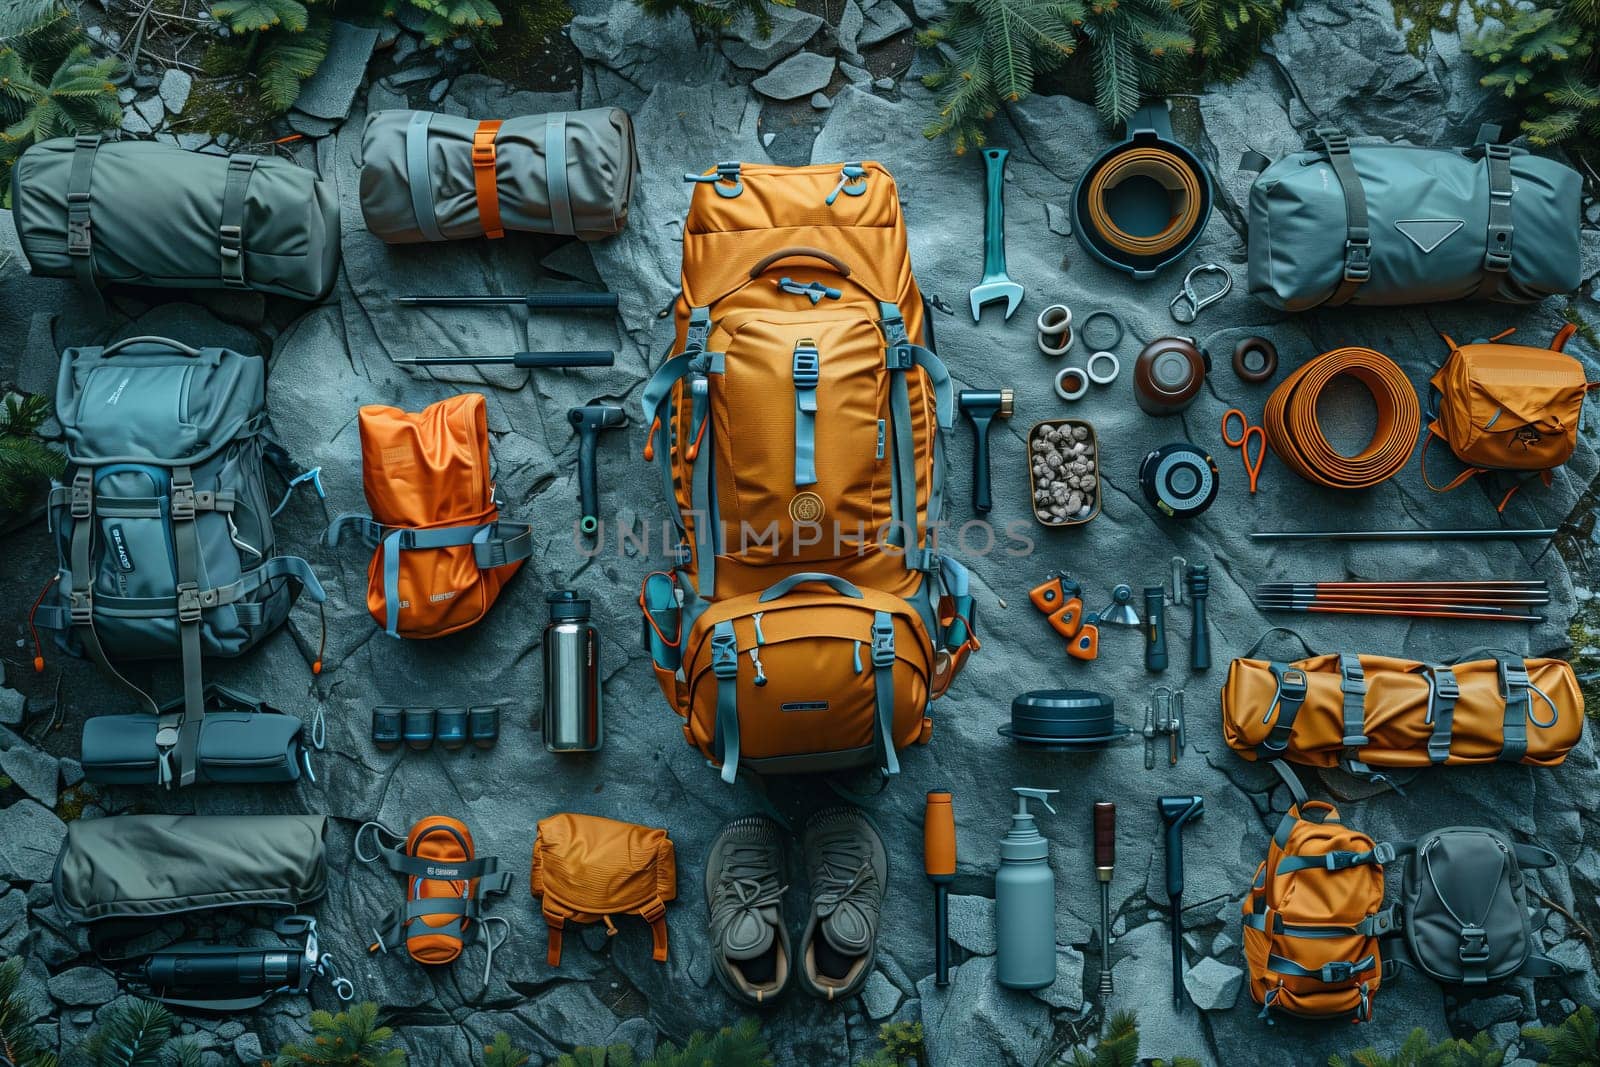 An electric blue backpack stands amidst an array of camping gear. The symmetry of the surrounding items creates a visually appealing pattern, resembling a piece of art